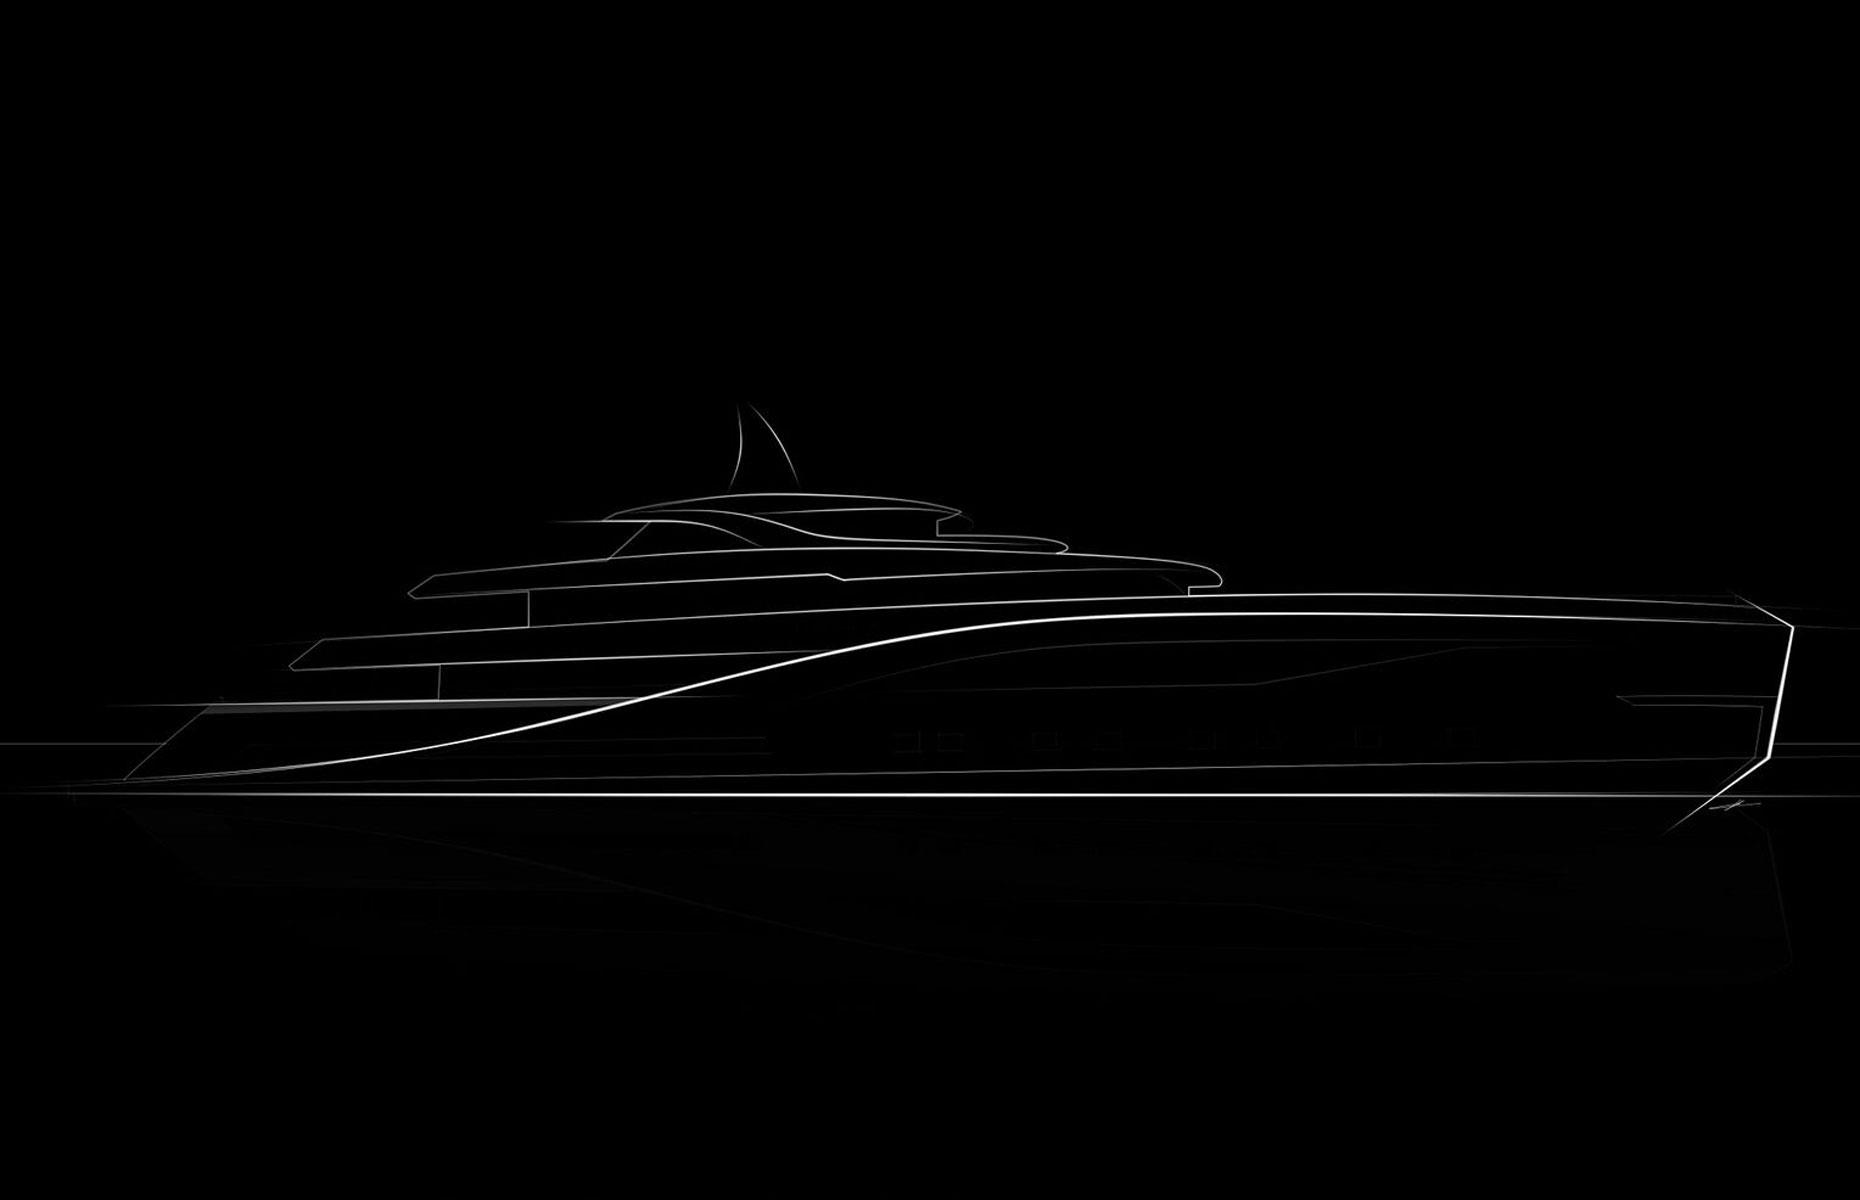 <p>Admiral Yachts, owned by The Italian Sea Group, is delivering two sensational superyachts this year, according to <em>Boat International</em>: the 256-foot <em>Custom 78 a</em>nd 253-foot <em>Blue Marlin</em> (pictured).</p>  <p>Sleek and elegant,<em> Blue Marlin's </em>exterior and interior are both the handiwork of prestigious Dutch studio Sinot Yacht Architecture and Design.</p>  <p>The superyacht accommodates 12 guests in six staterooms and offers them a wealth of amenities, including a 19-foot swimming pool, a private spa, and a helipad. Its more sustainable credentials include a lower-emission diesel-electric propulsion system.</p>